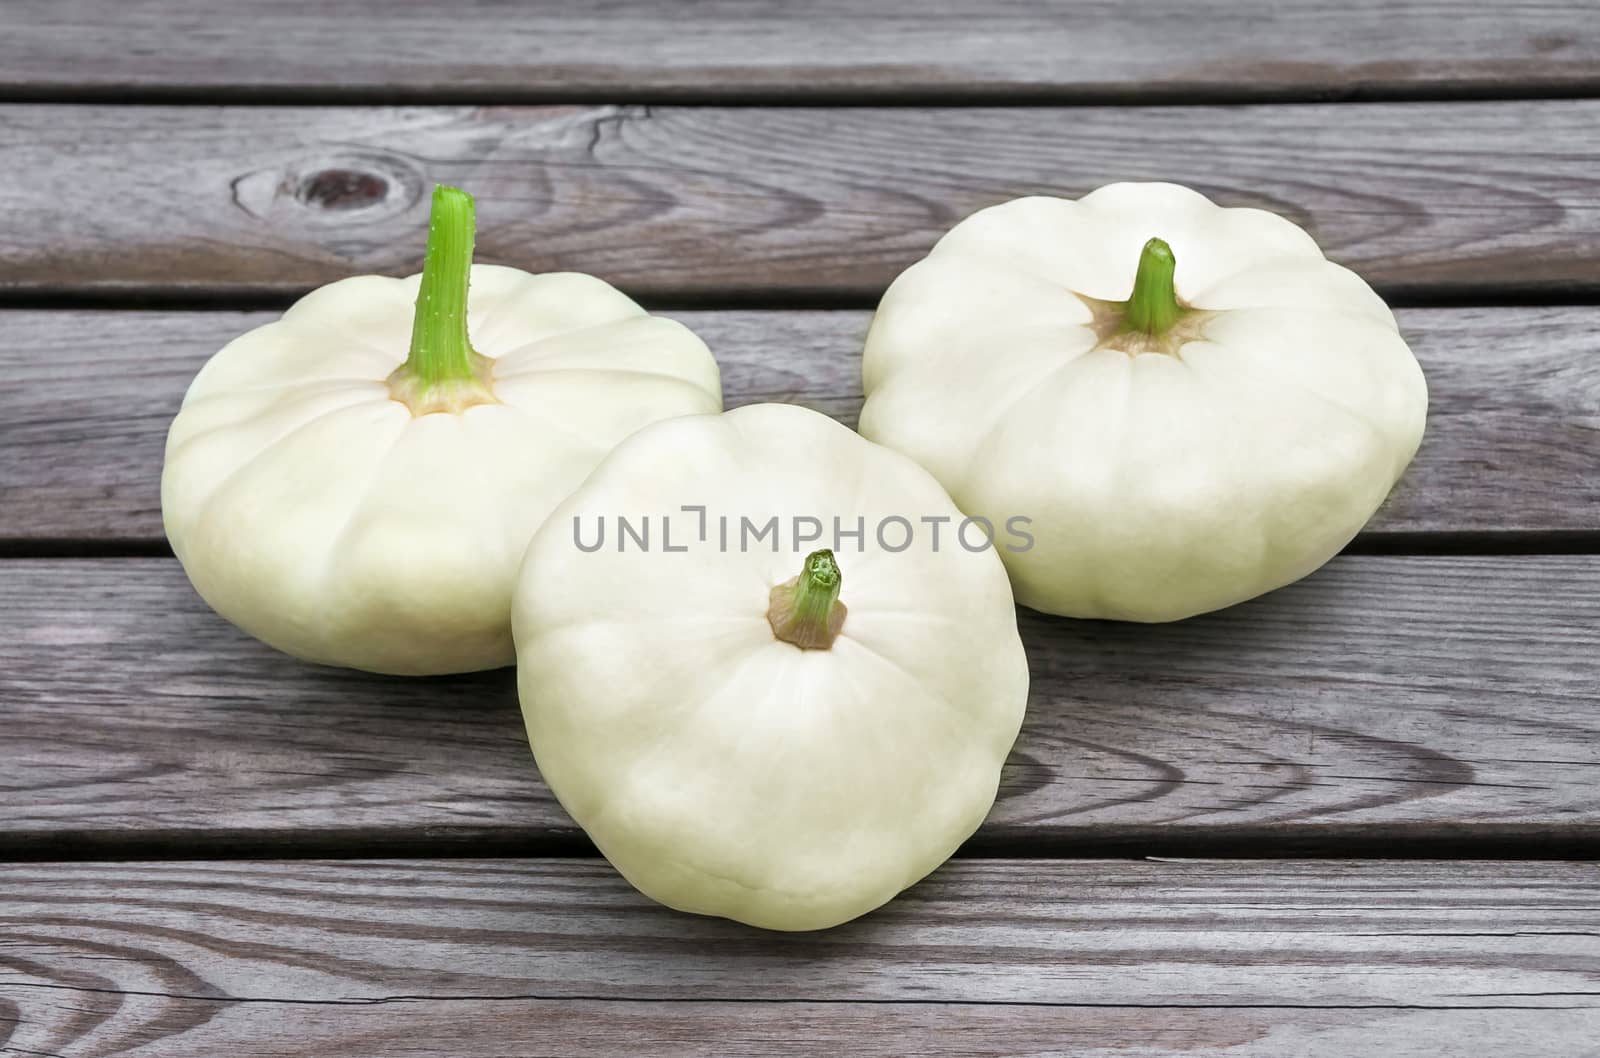 three raw squash on the wooden table